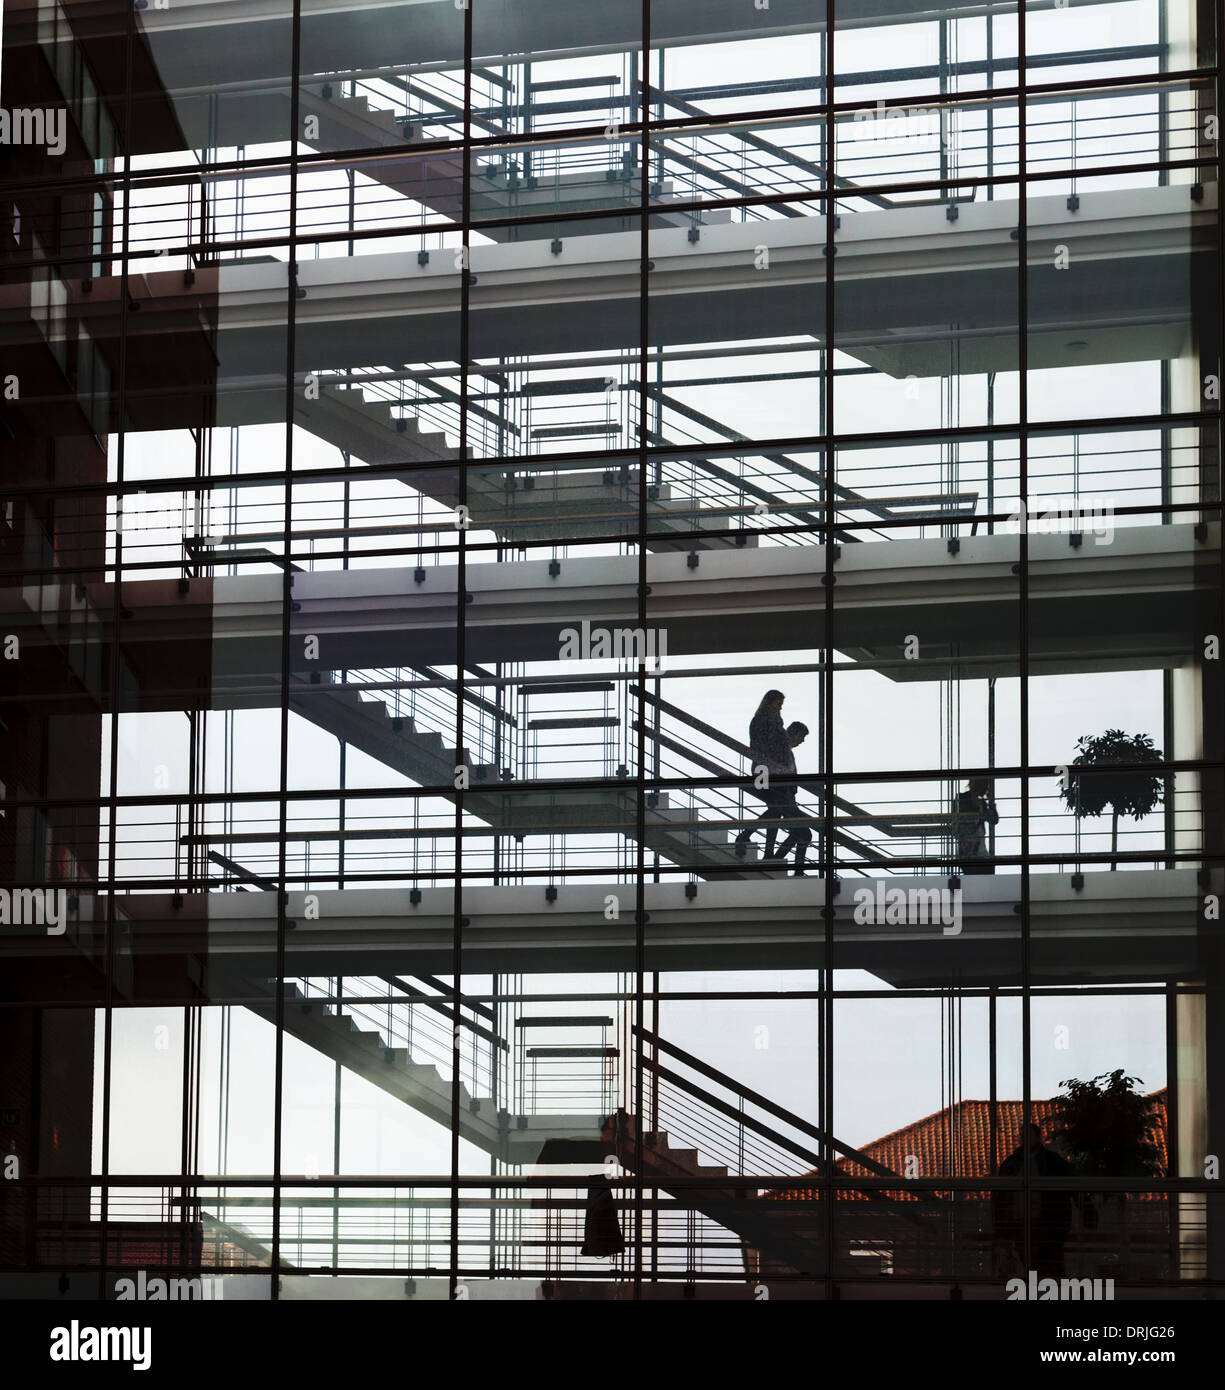 silhouette of stairs and walkways in glass walled building Stock Photo